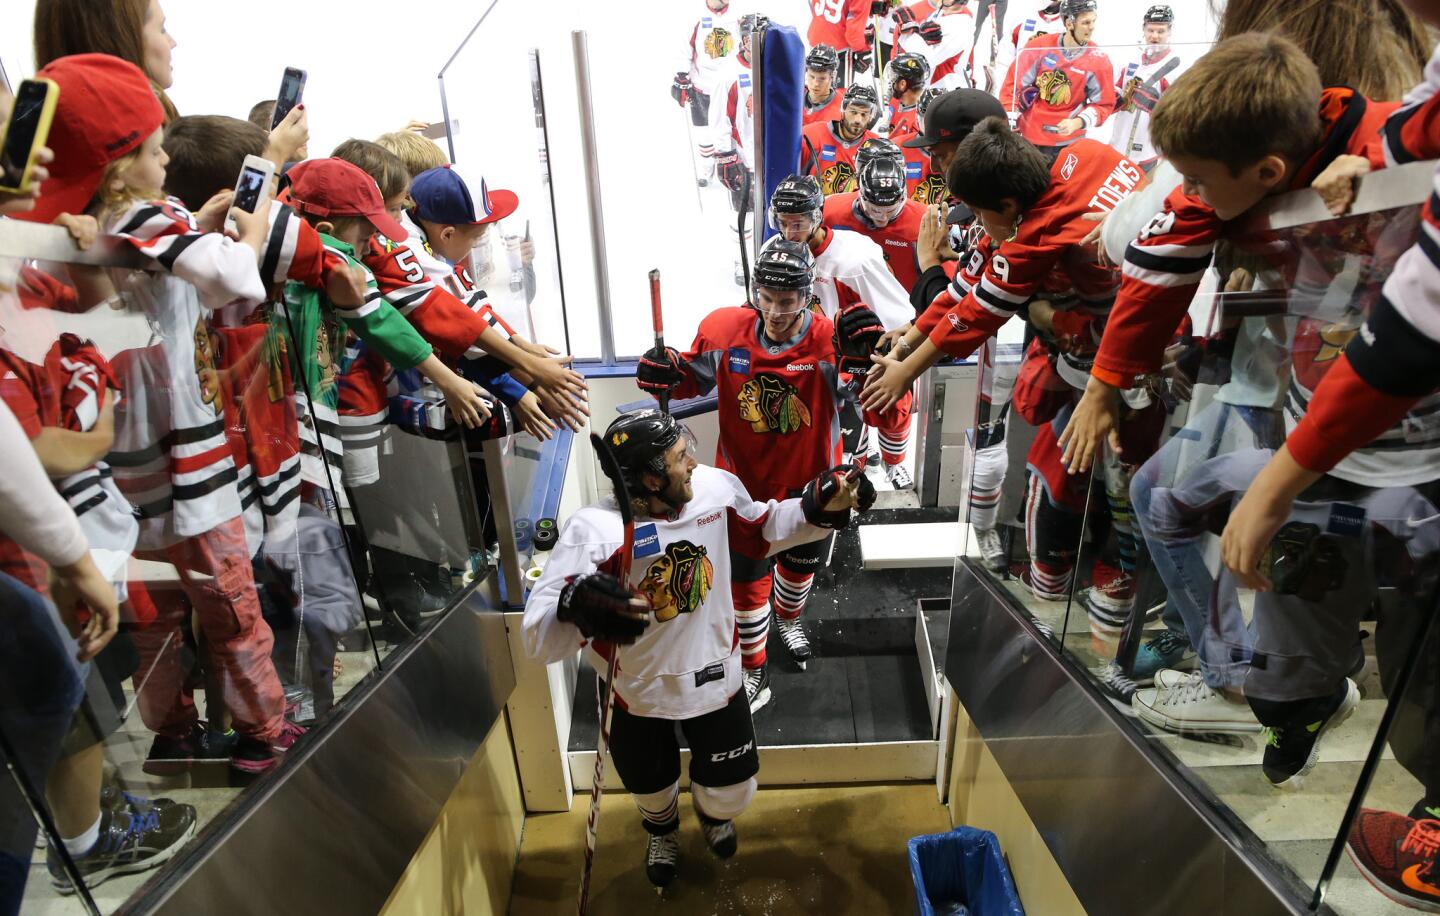 Blackhawks players receive high fives from fans following a scrimmage game at Blackhawks training camp.